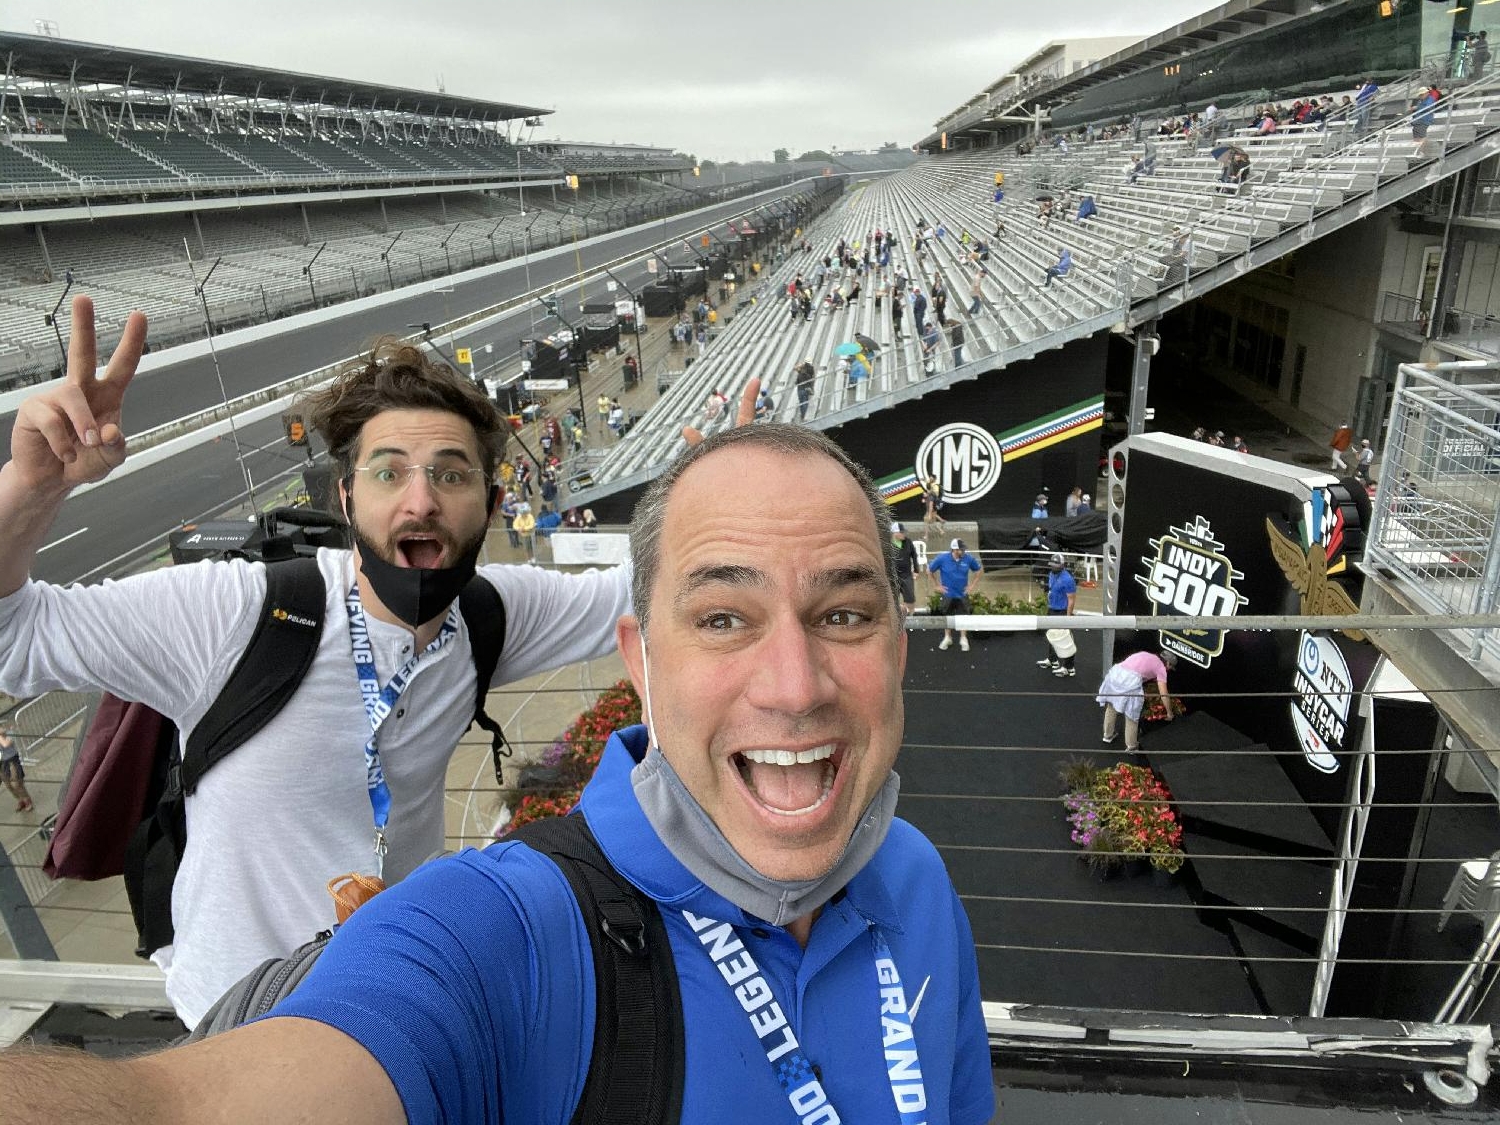 Having fun during a work day at the Indianapolis 500